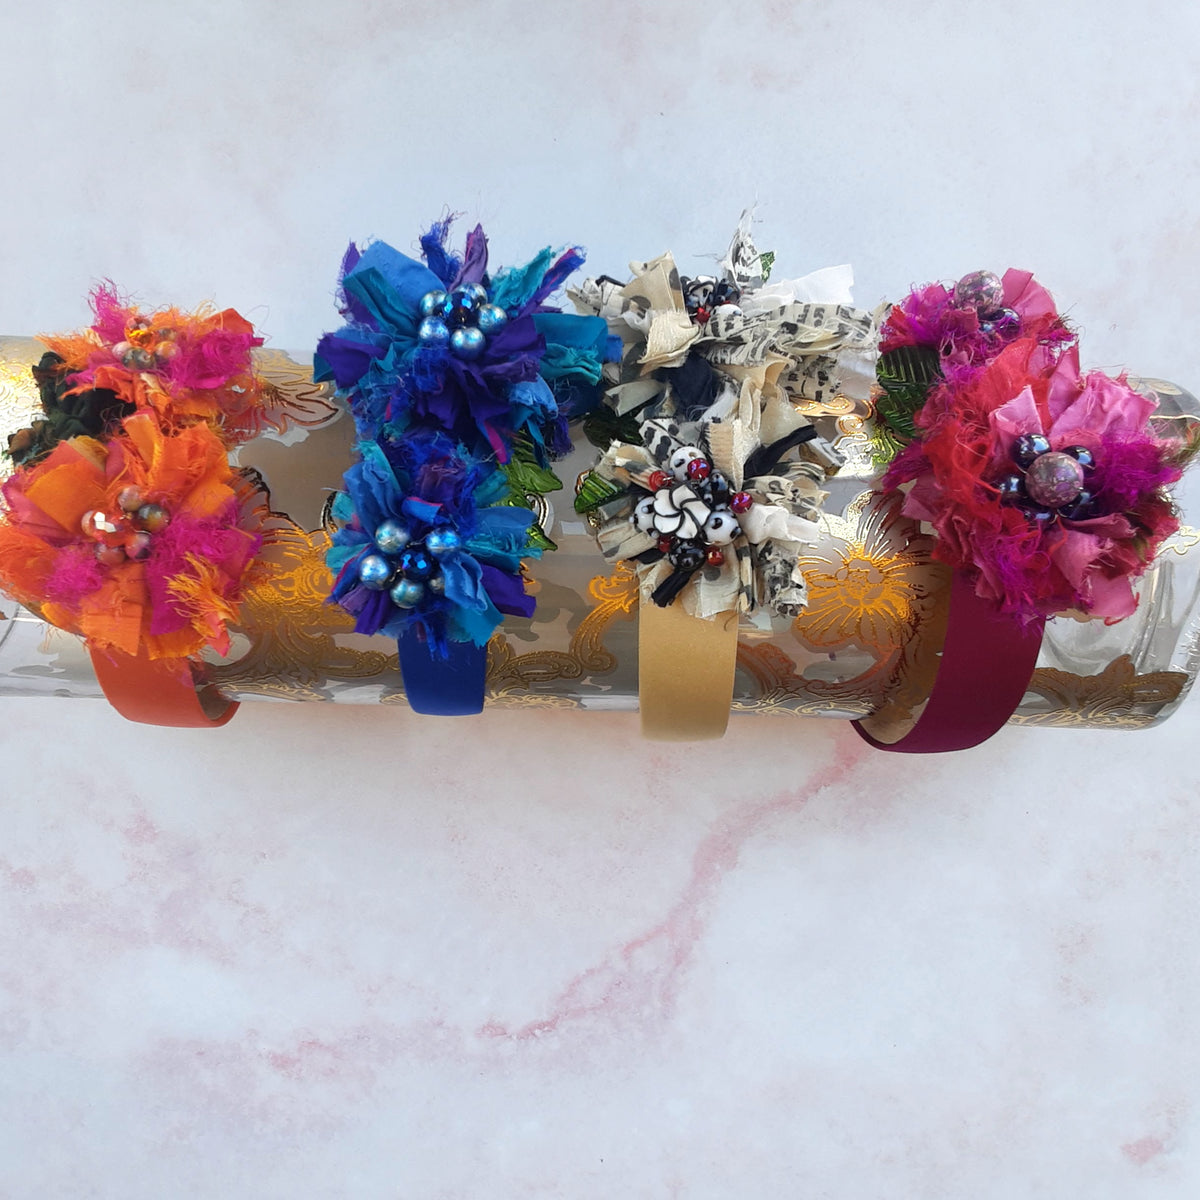 Flexible Silk Flower Headband - Colorful Floral Fascinator - Unique OOAK Gift for Her